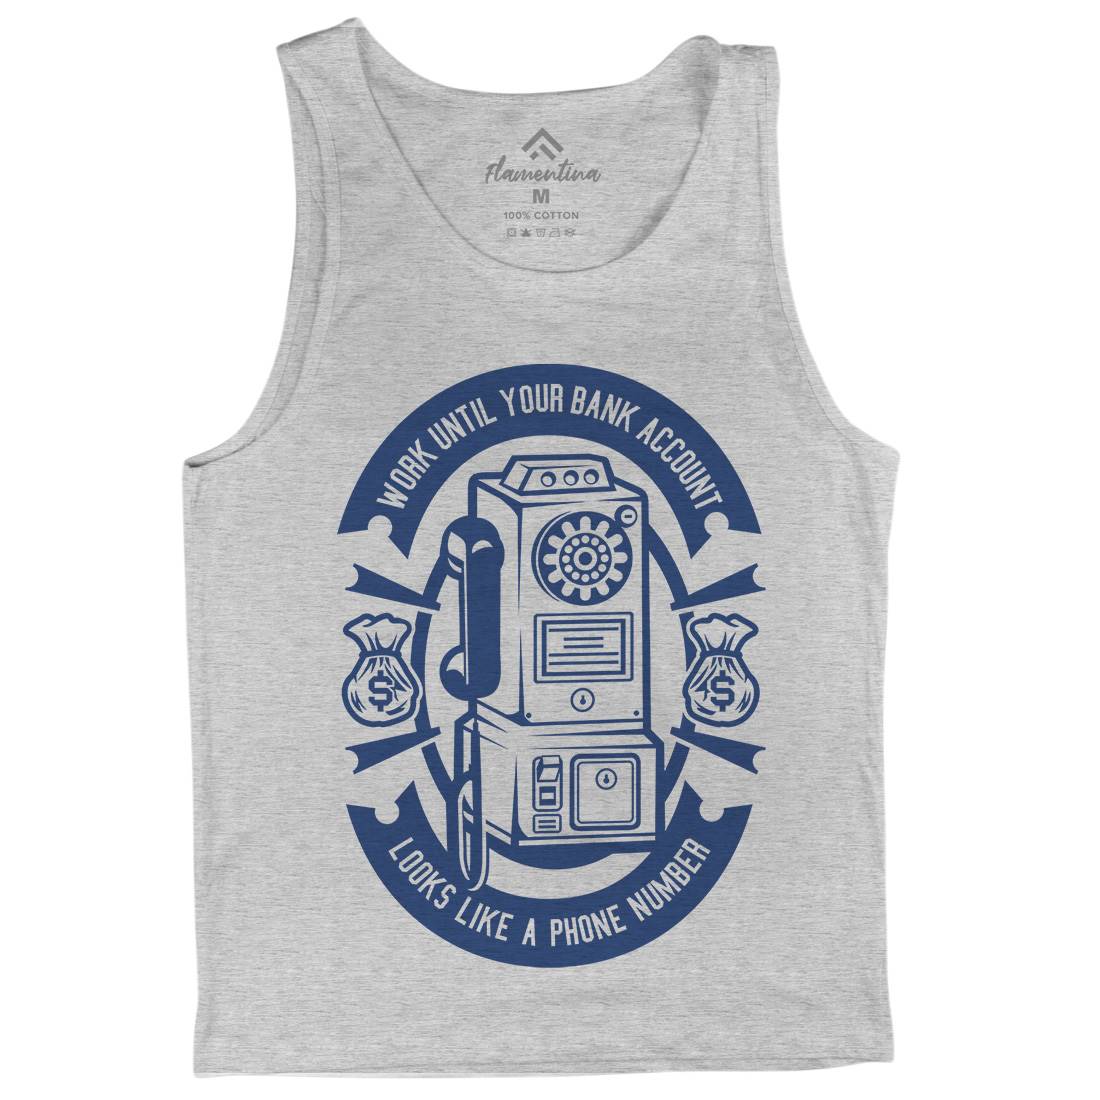 Phone Number Mens Tank Top Vest Quotes A258